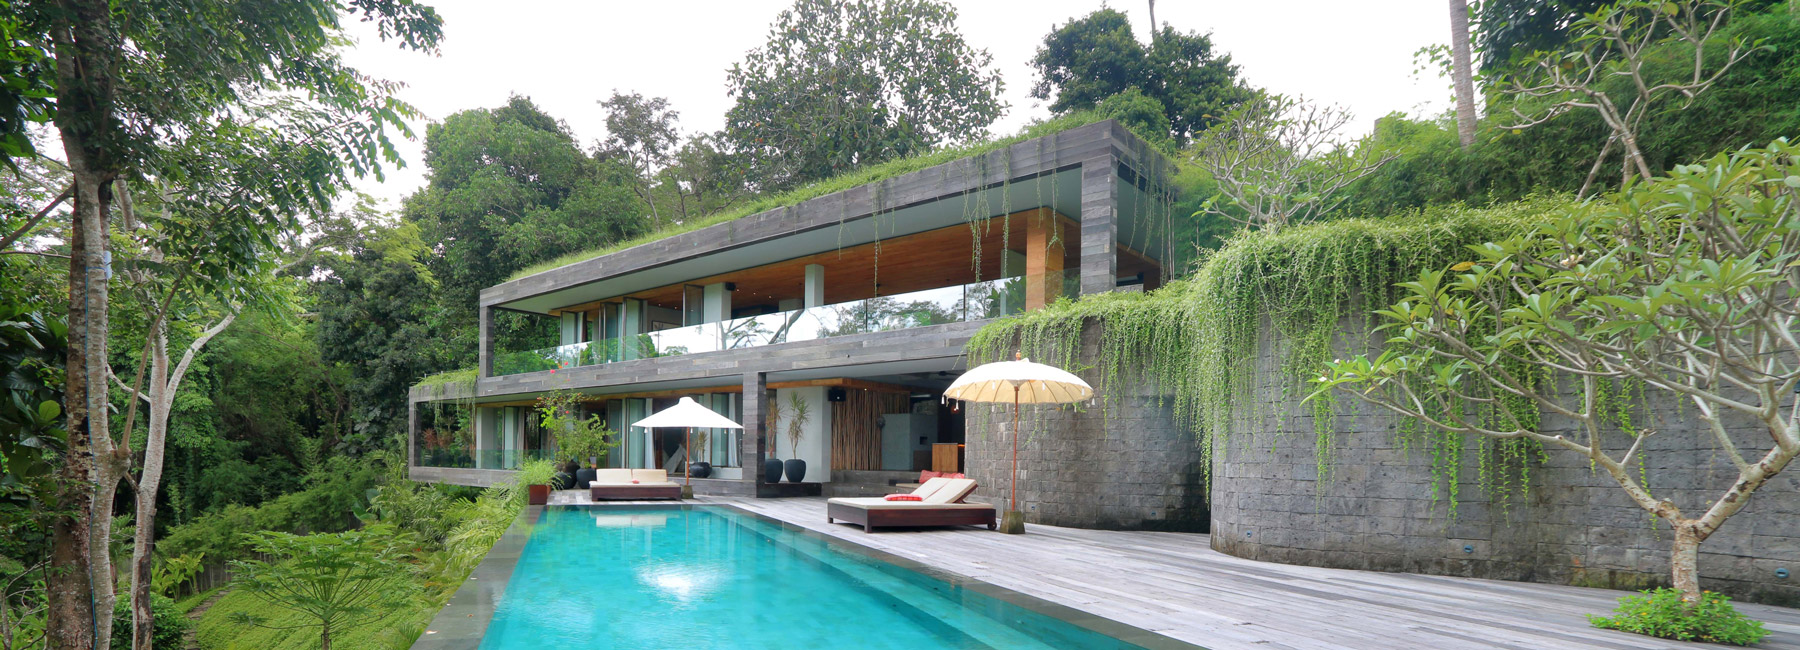 WOMhouse's chameleon villa 'disappears' within its balinese surroundings